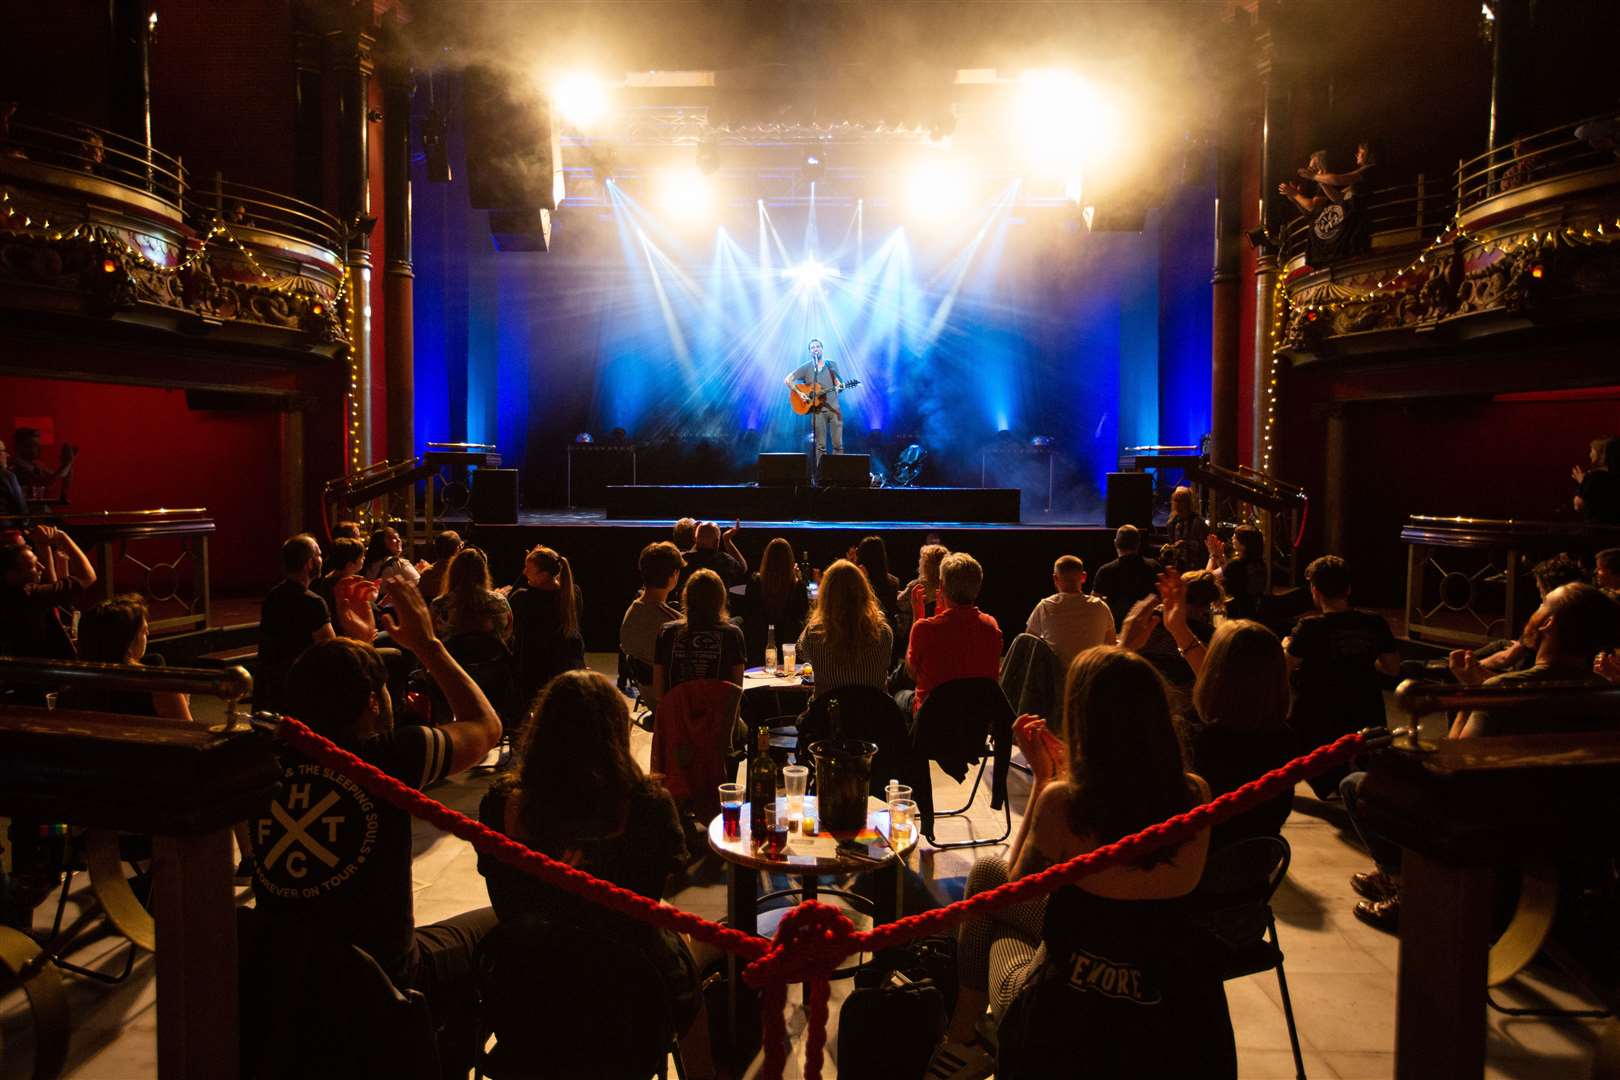 A socially distanced audience at the Clapham Grand in London (Corinne Cumming/PA)